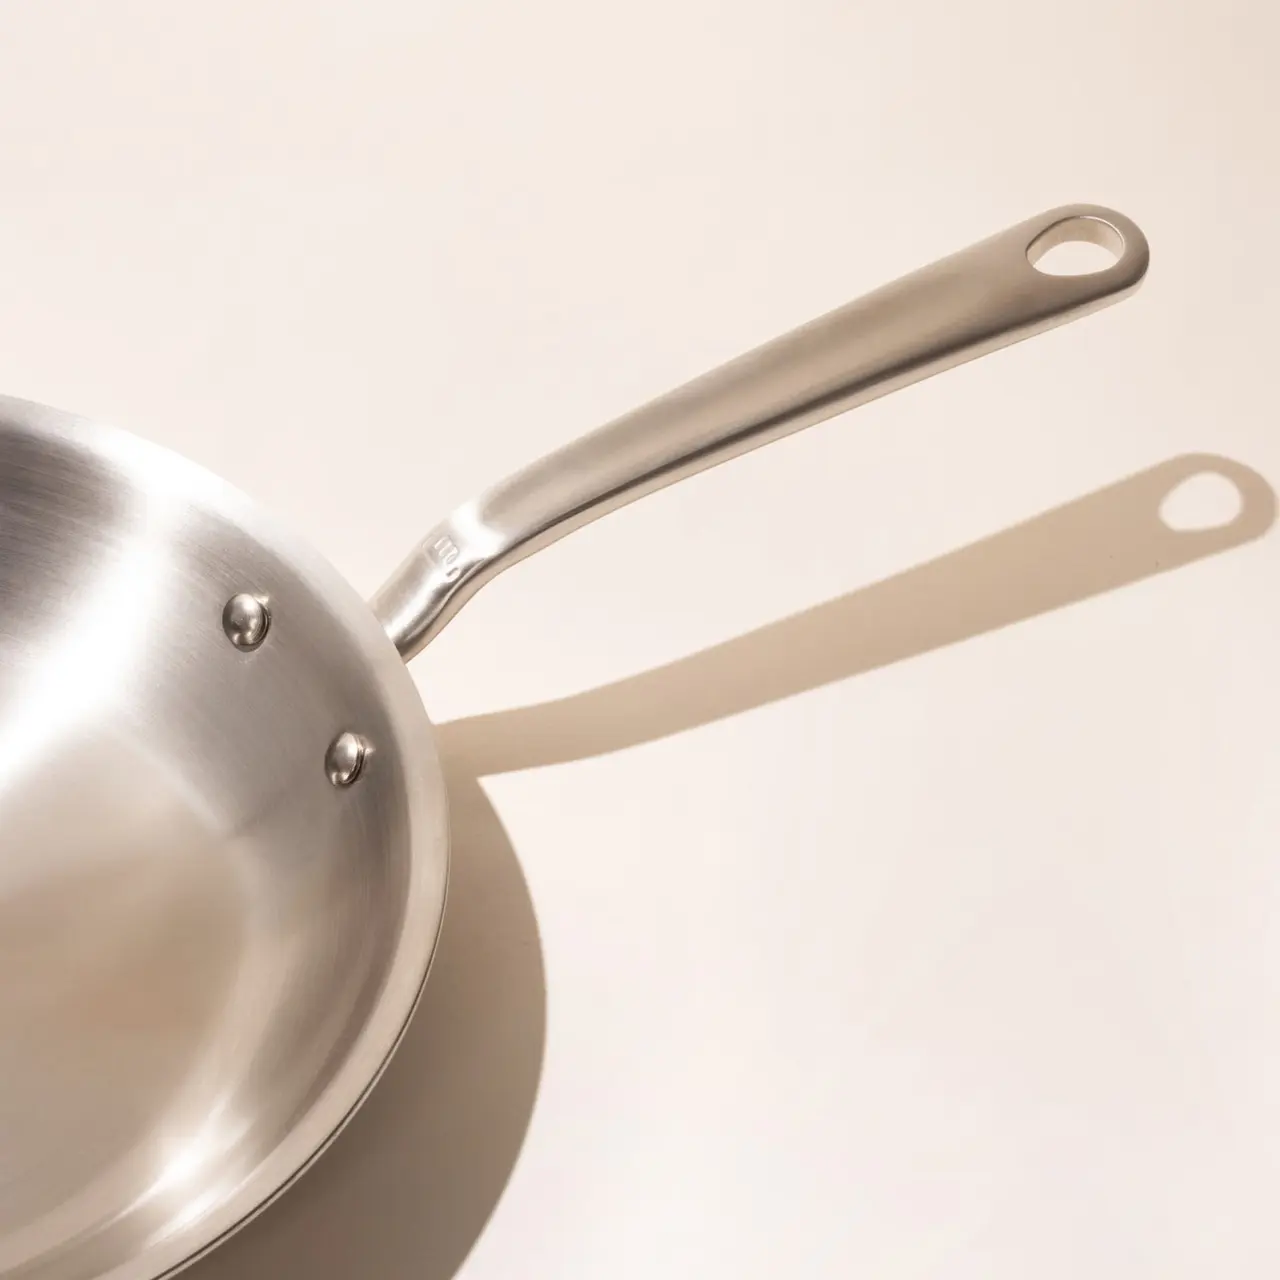 10 inch stainless steel frying pan detail image